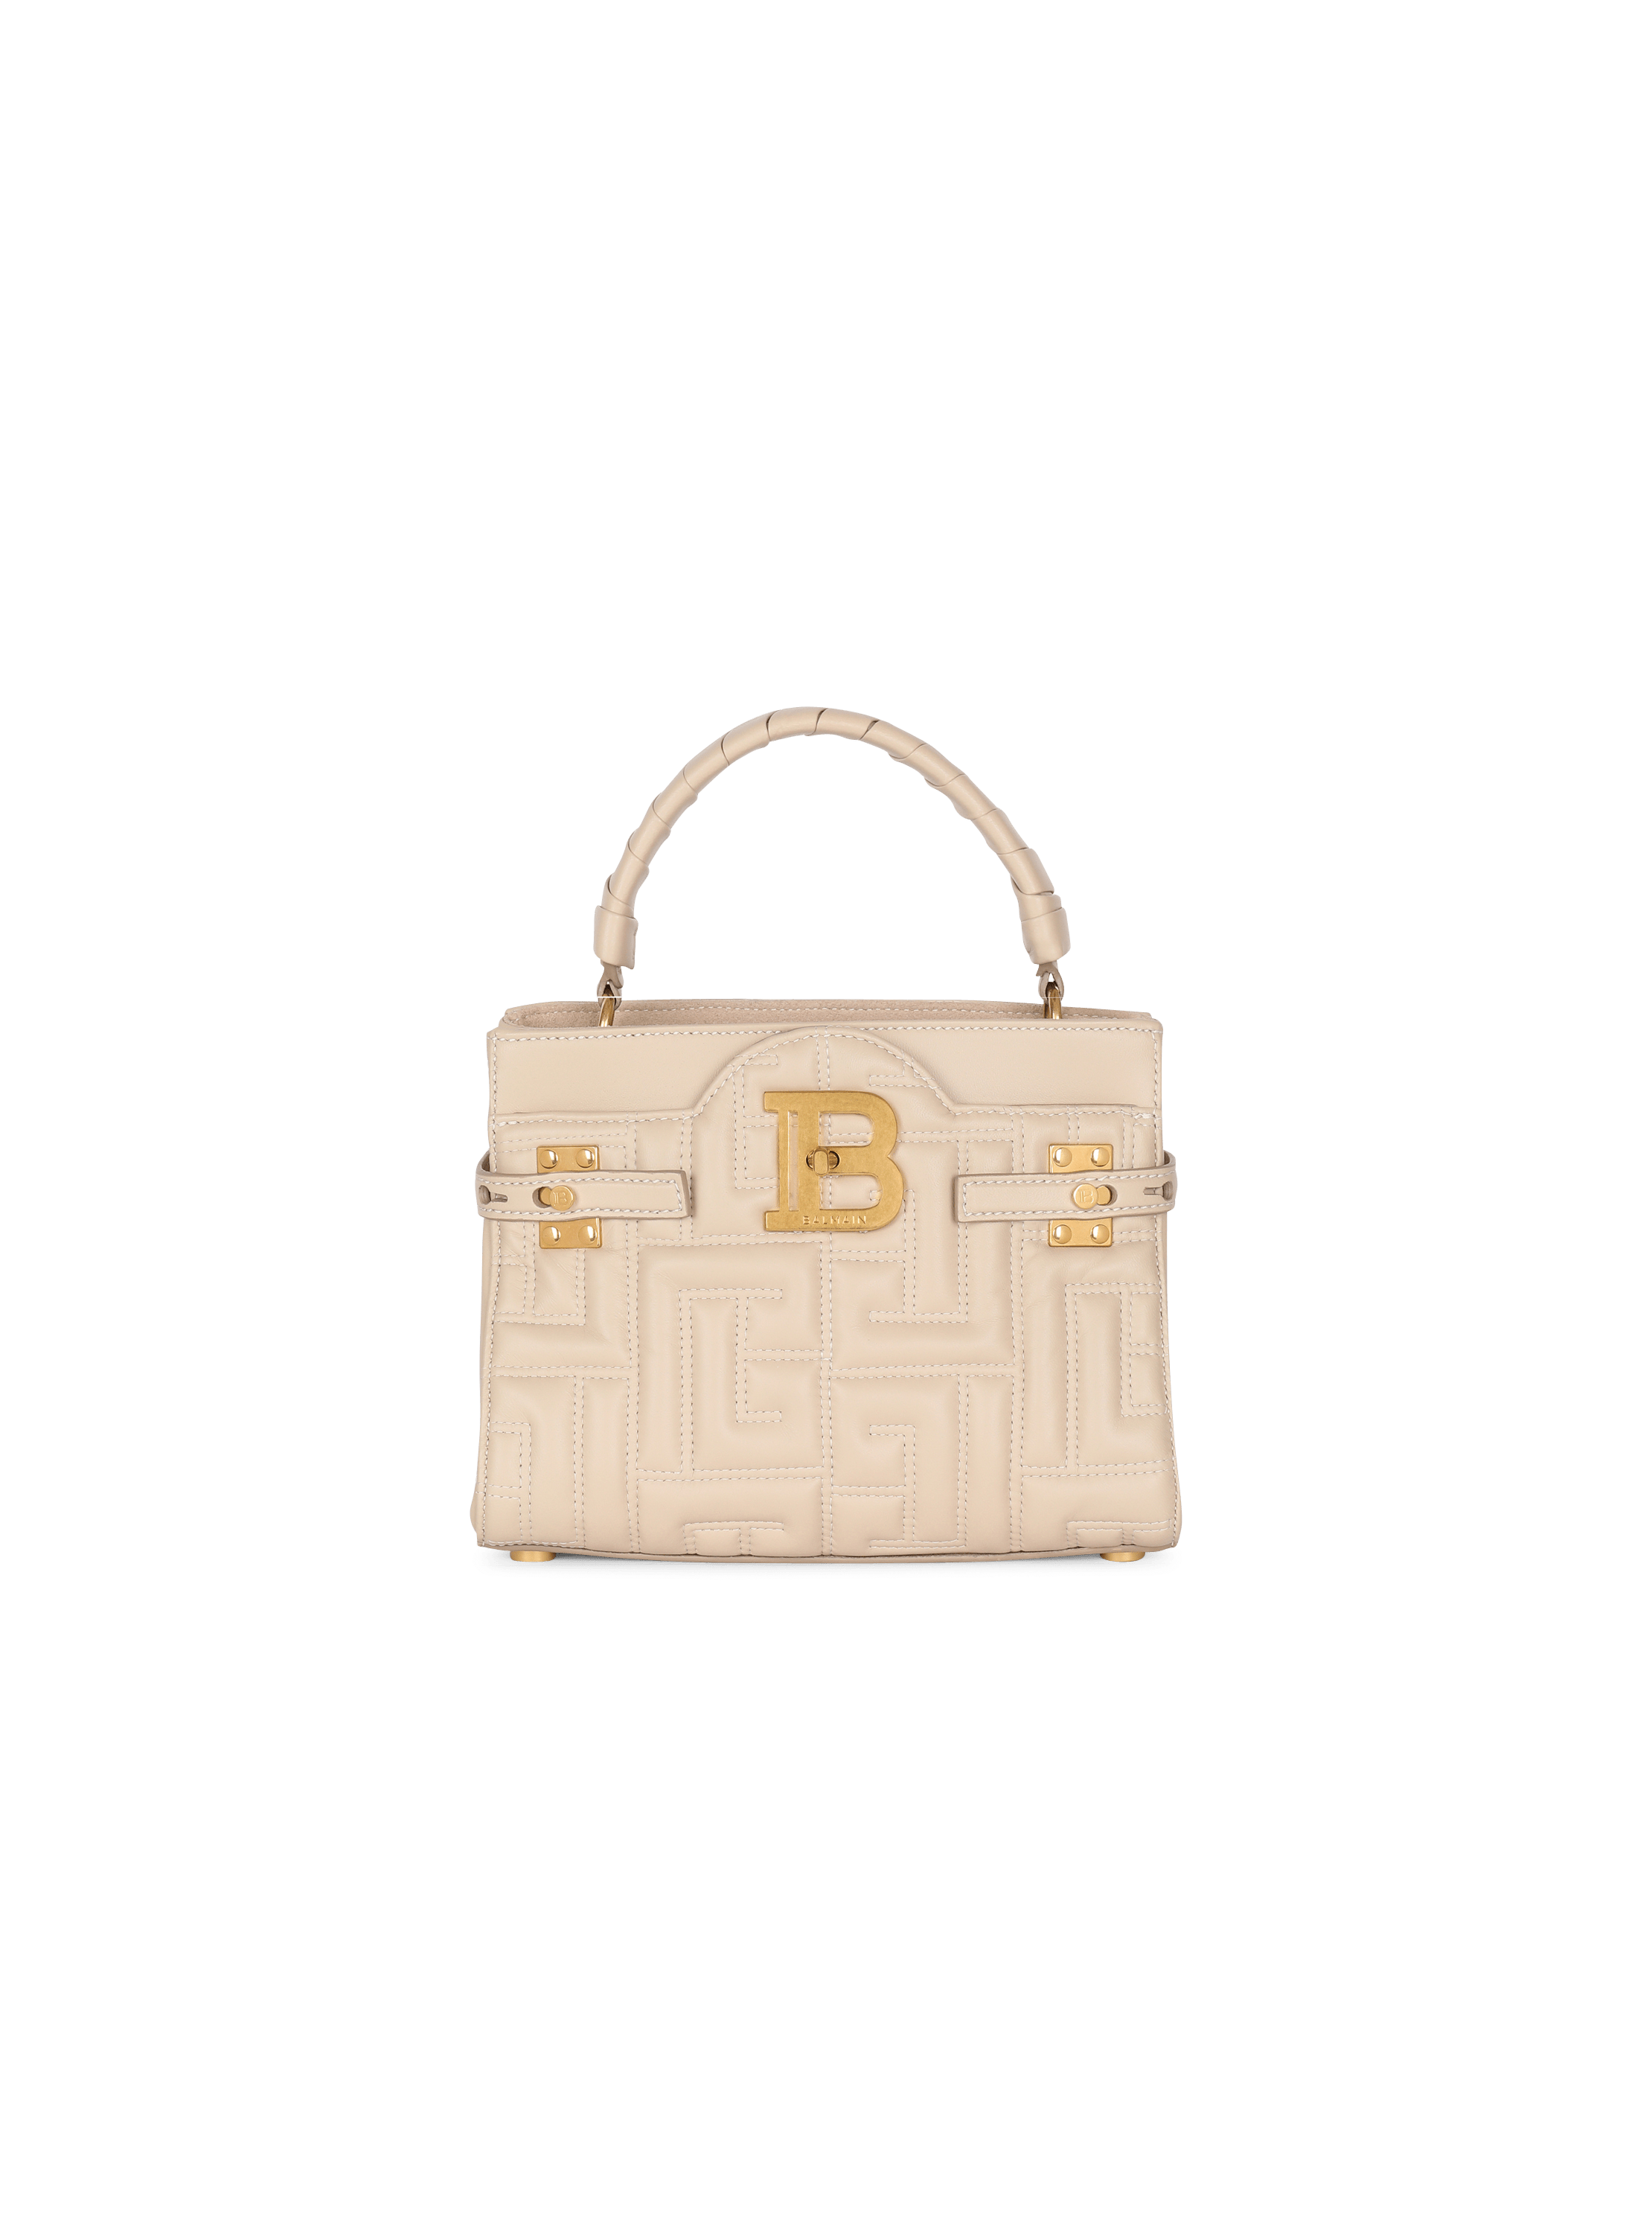 Best Clear Purses & See-Through Cross-Body Bags 2019